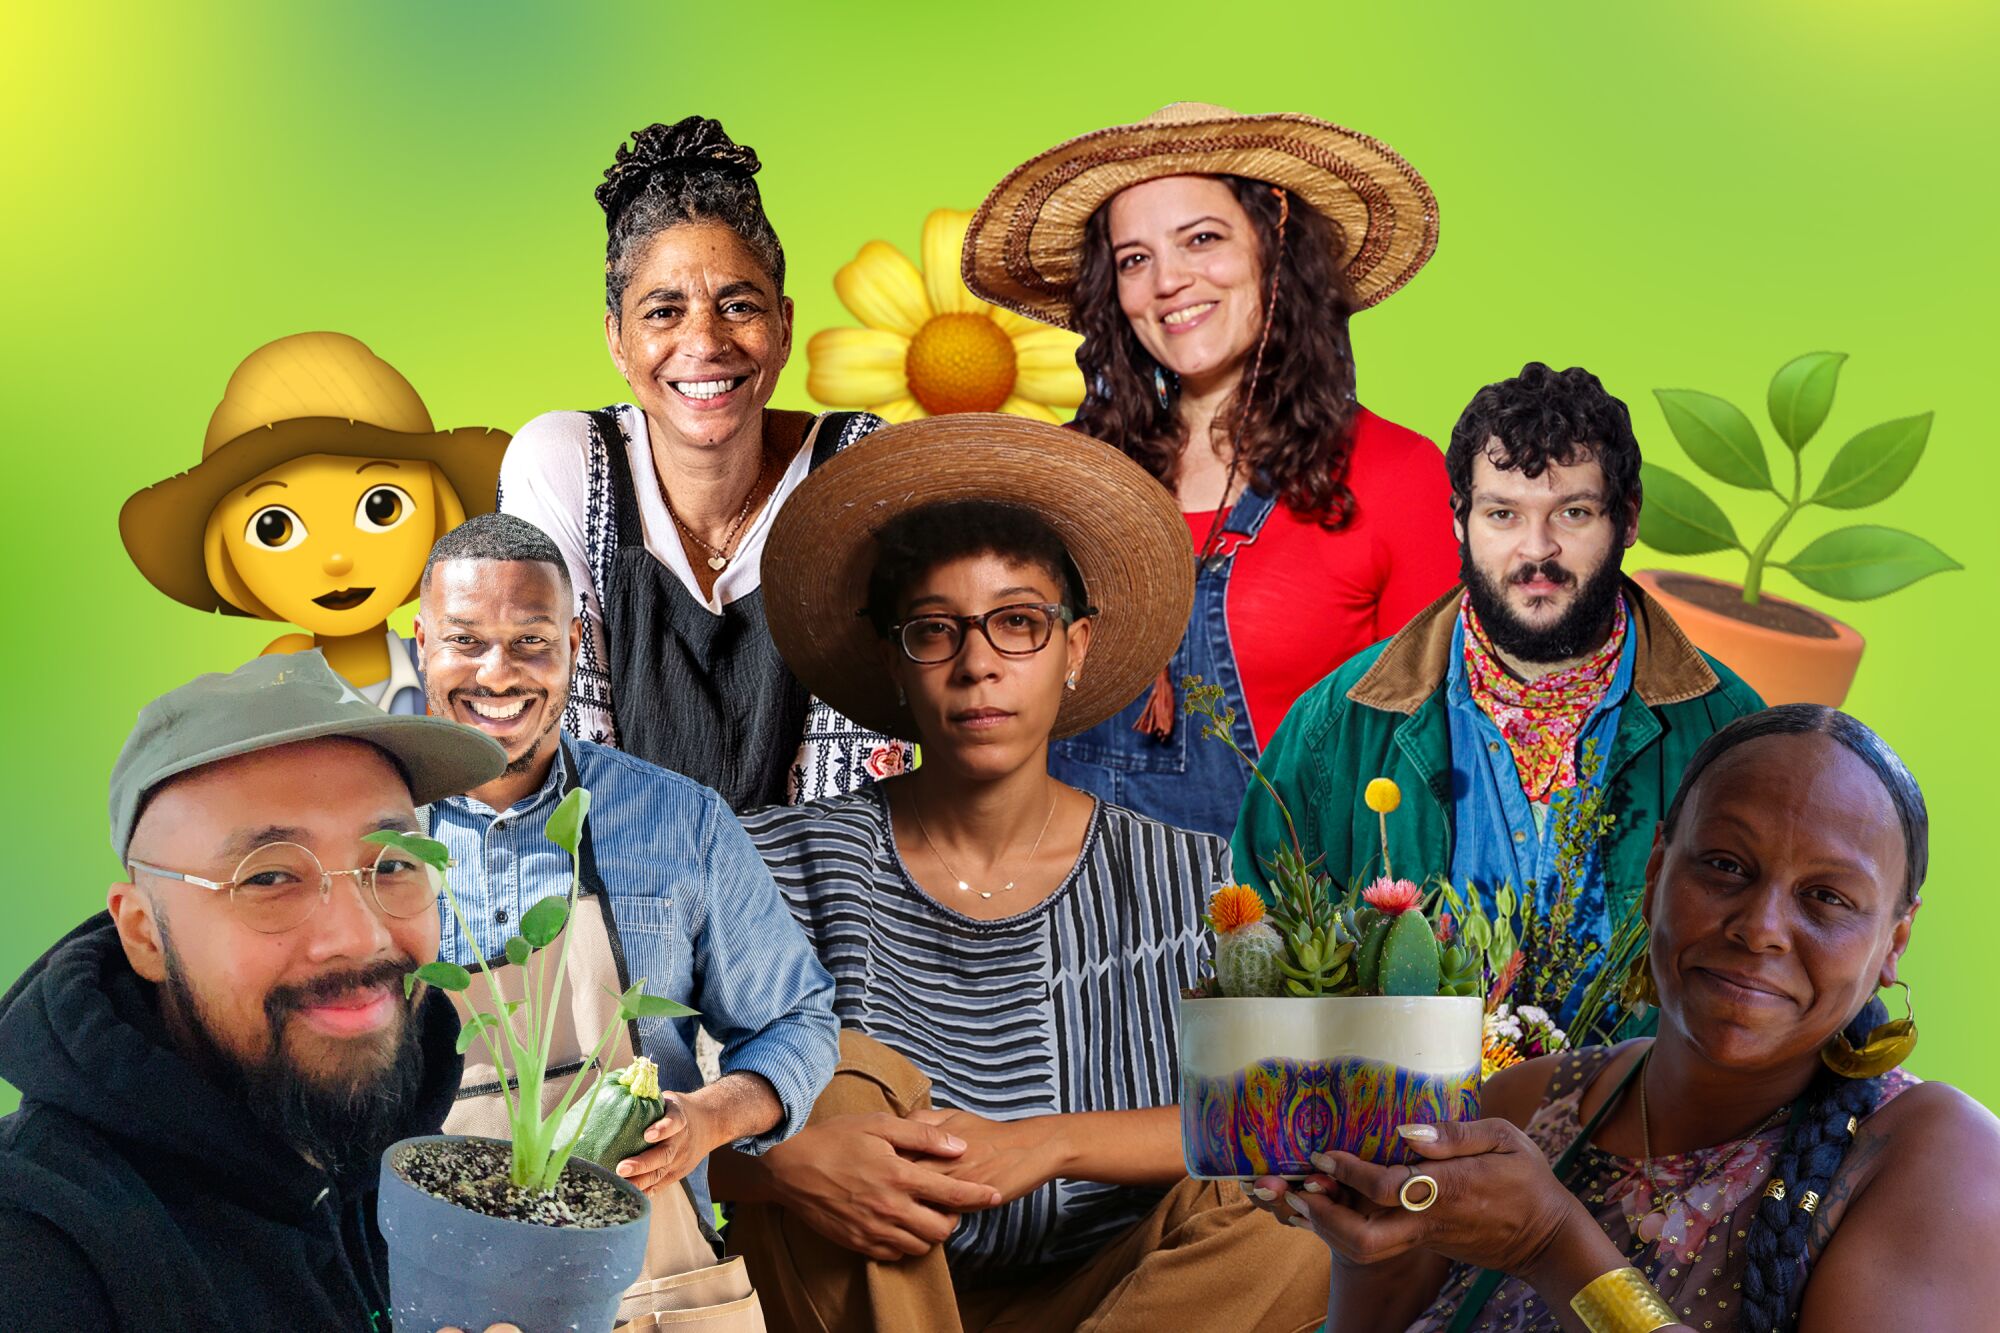 A collage of seven people, some holding plants or wearing gardening hats